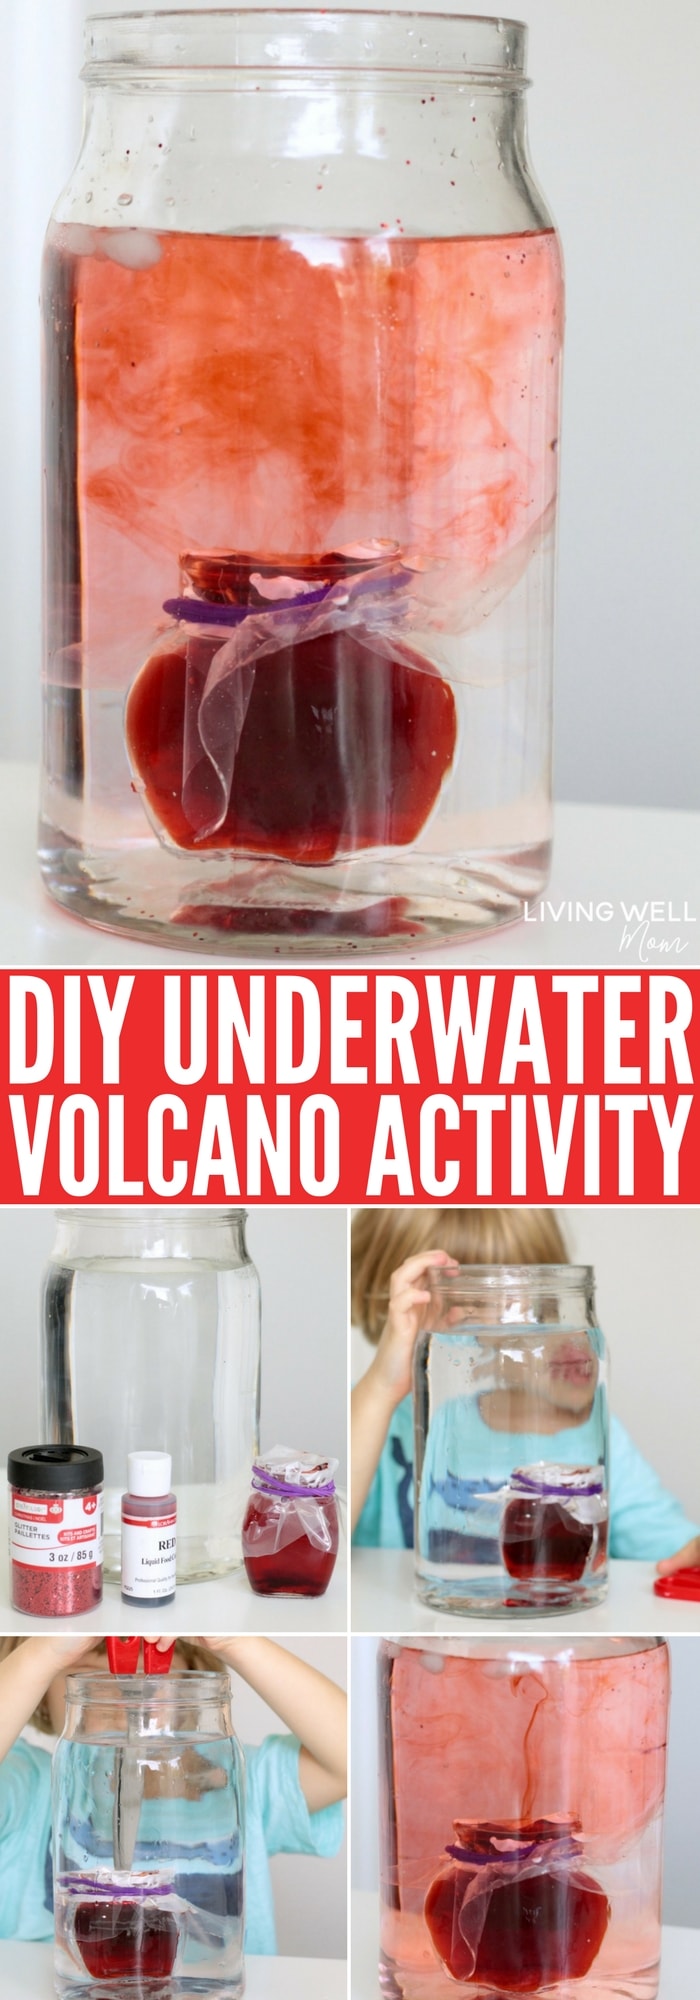 This glittery easy-to-do STEM activity features an underwater volcano and teaches kids about water temperature, travel, how volcanoes work and more fun science!